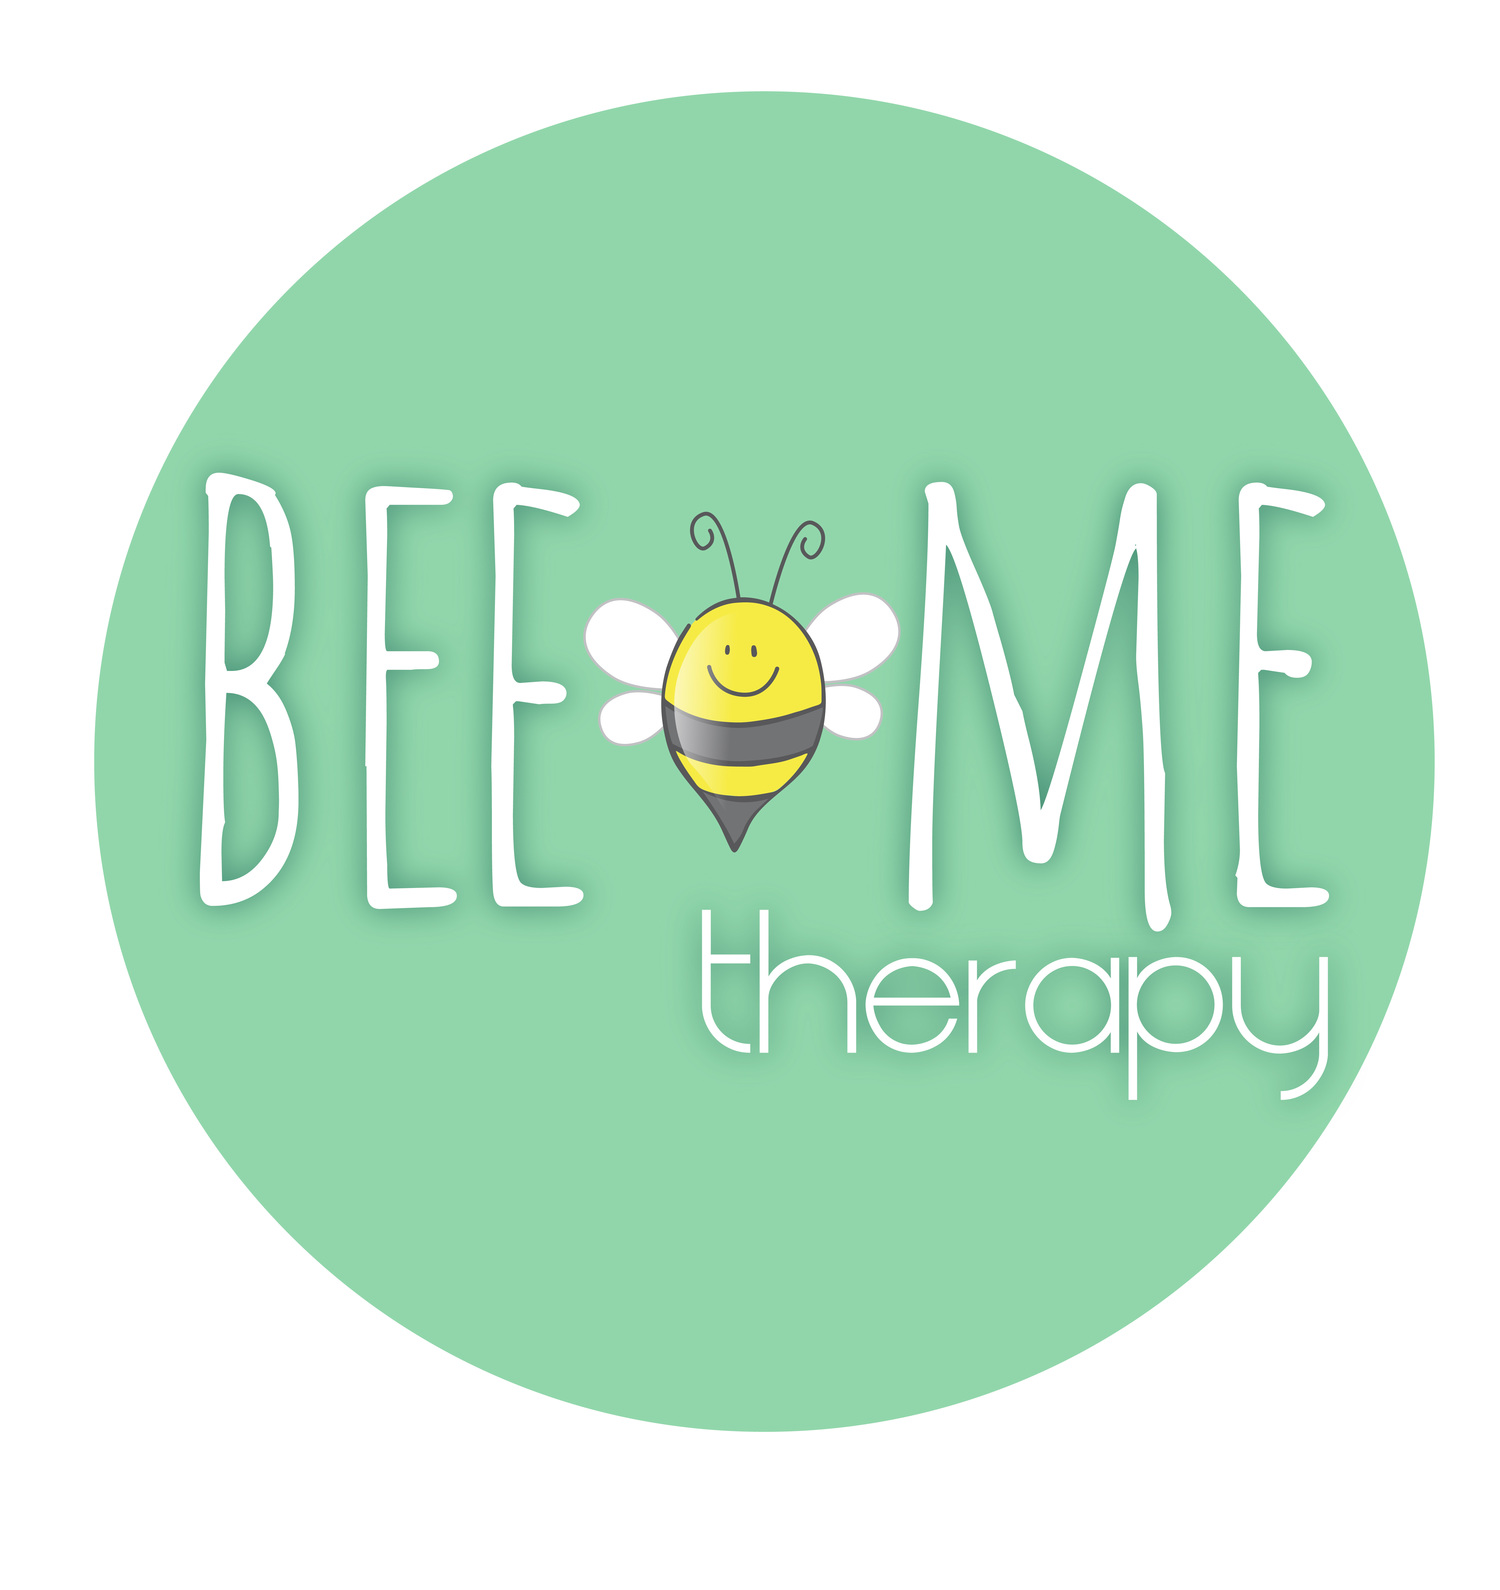 BEE ME THERAPY